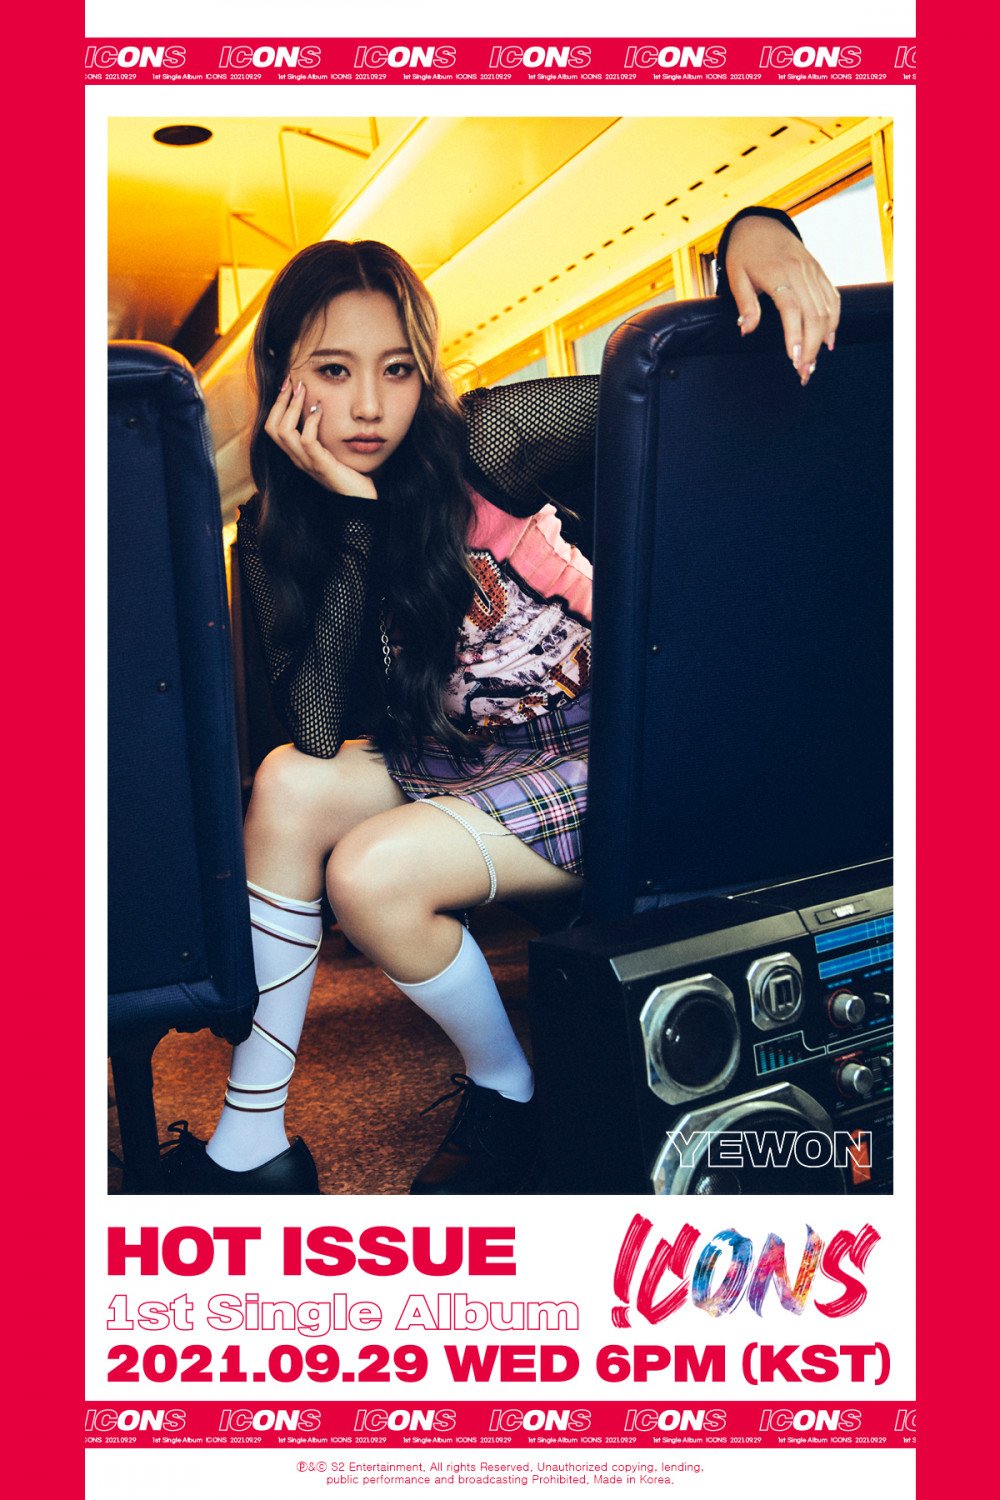 HOT ISSUE - teasers of Yewon for ‘ICONS’